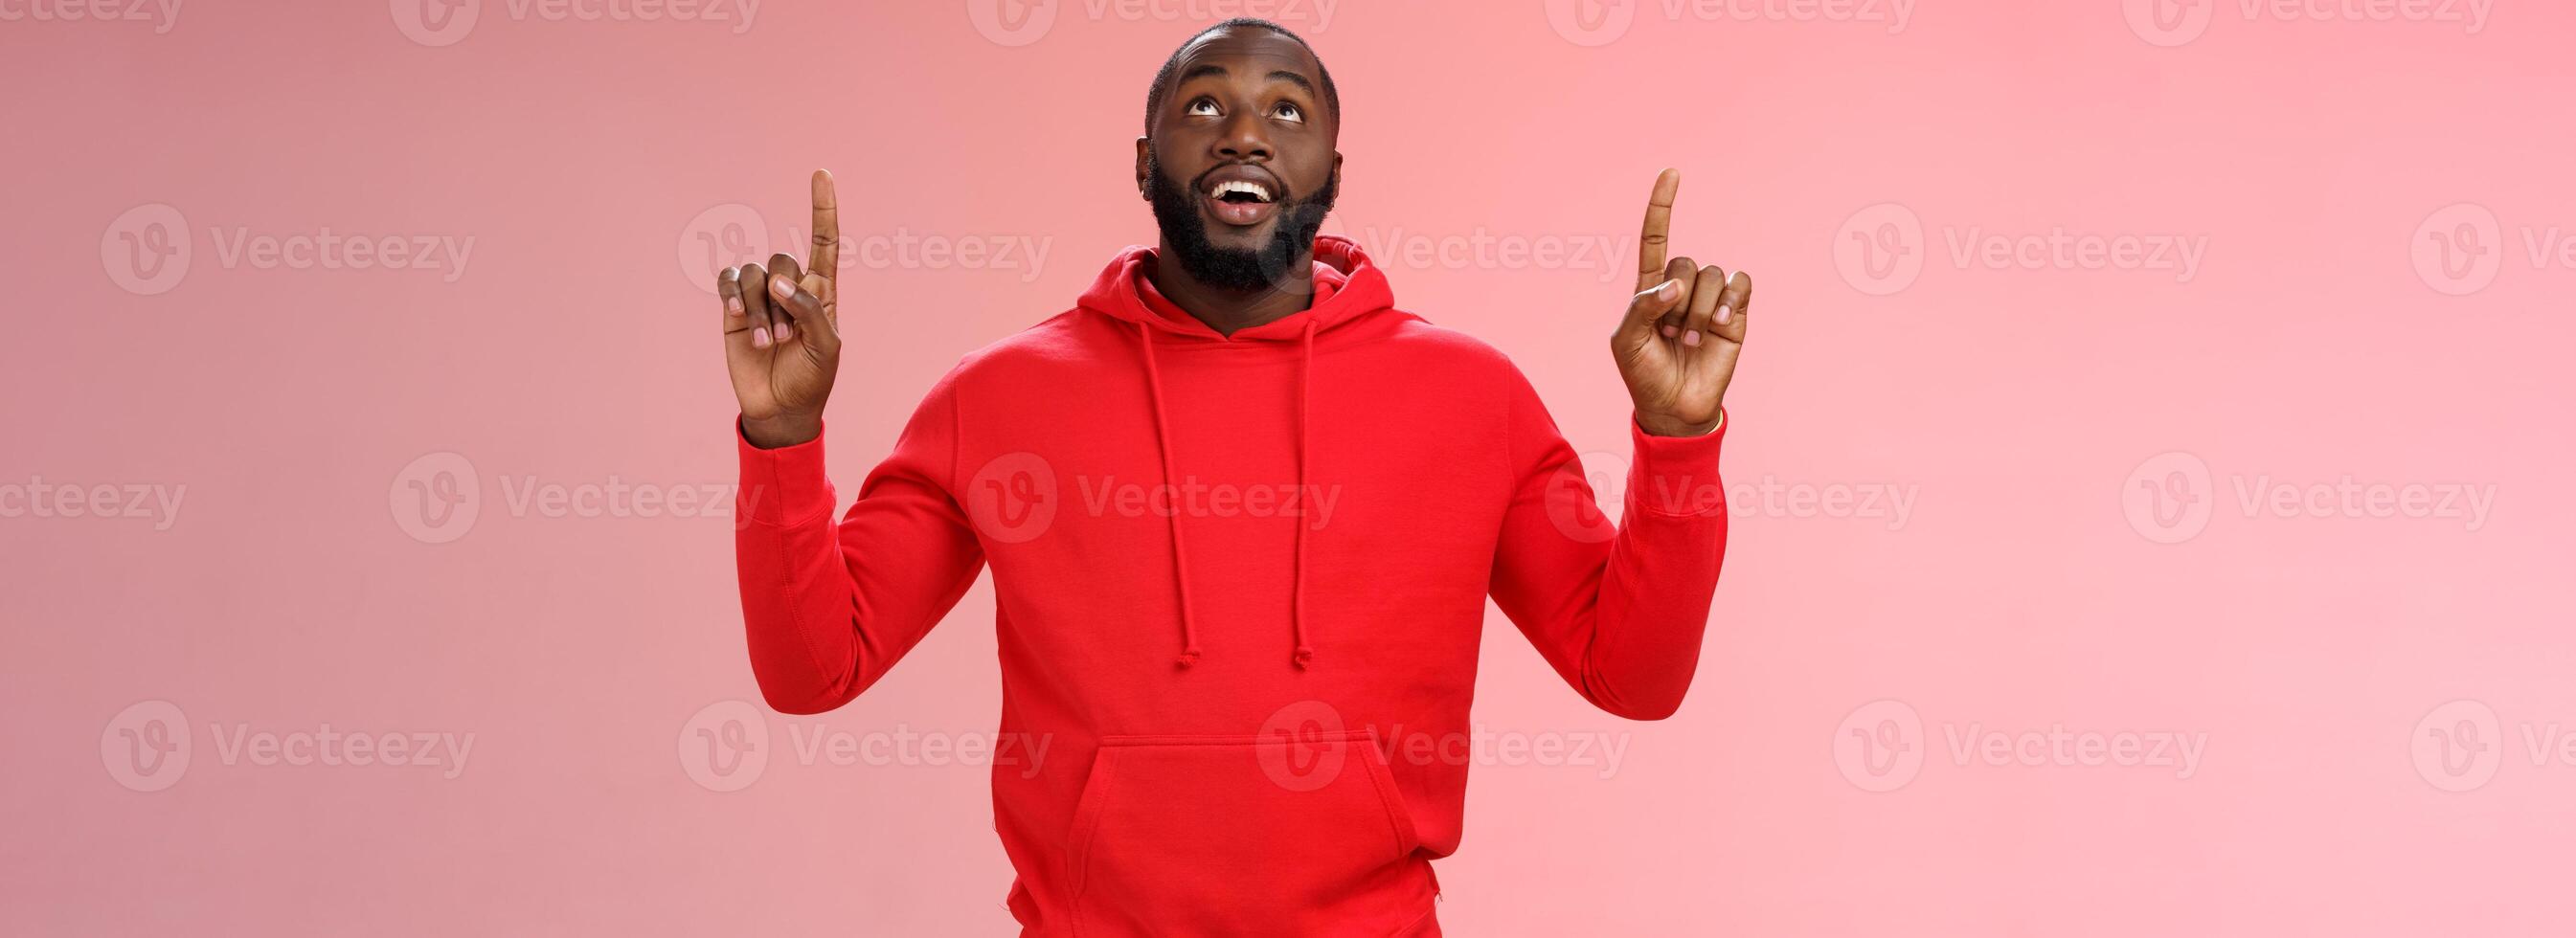 Fascinated attractive black bearded boyfriend gazing shooting star raise head impressed smiling amused pointing up curiously looking upwards, standing pink background enjoy stargazing photo